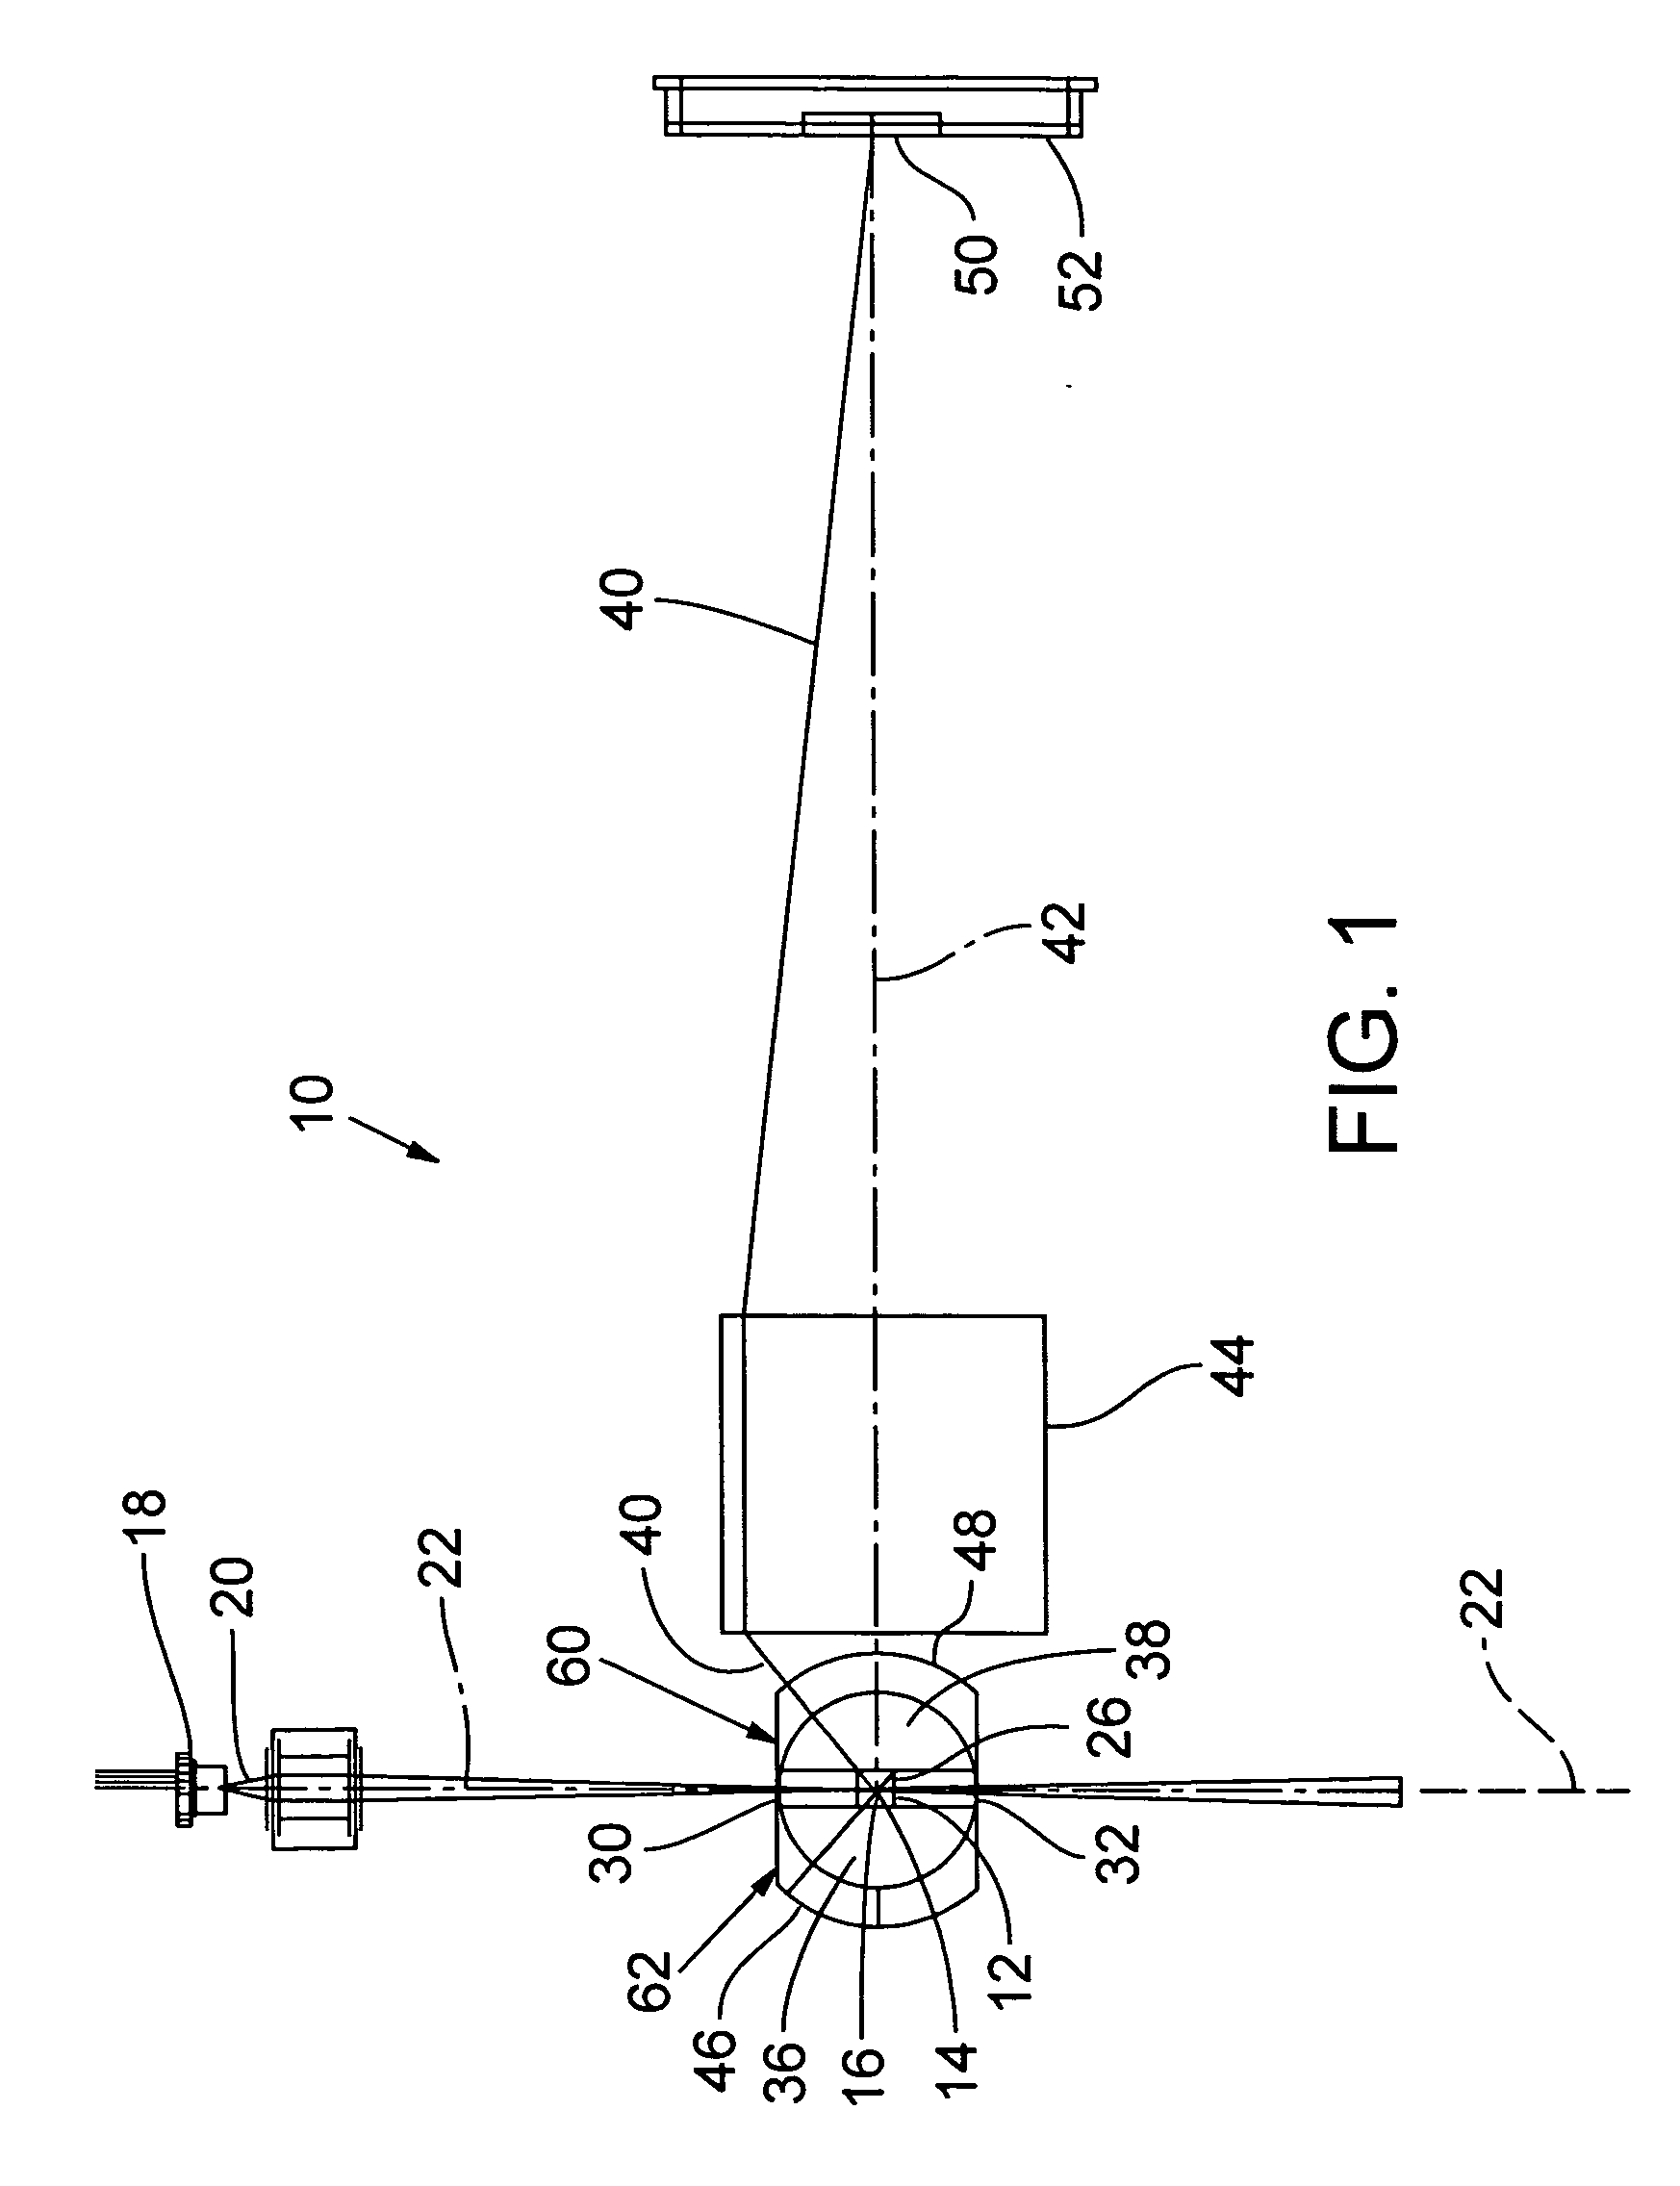 Particle detection system implemented with an immersed optical system